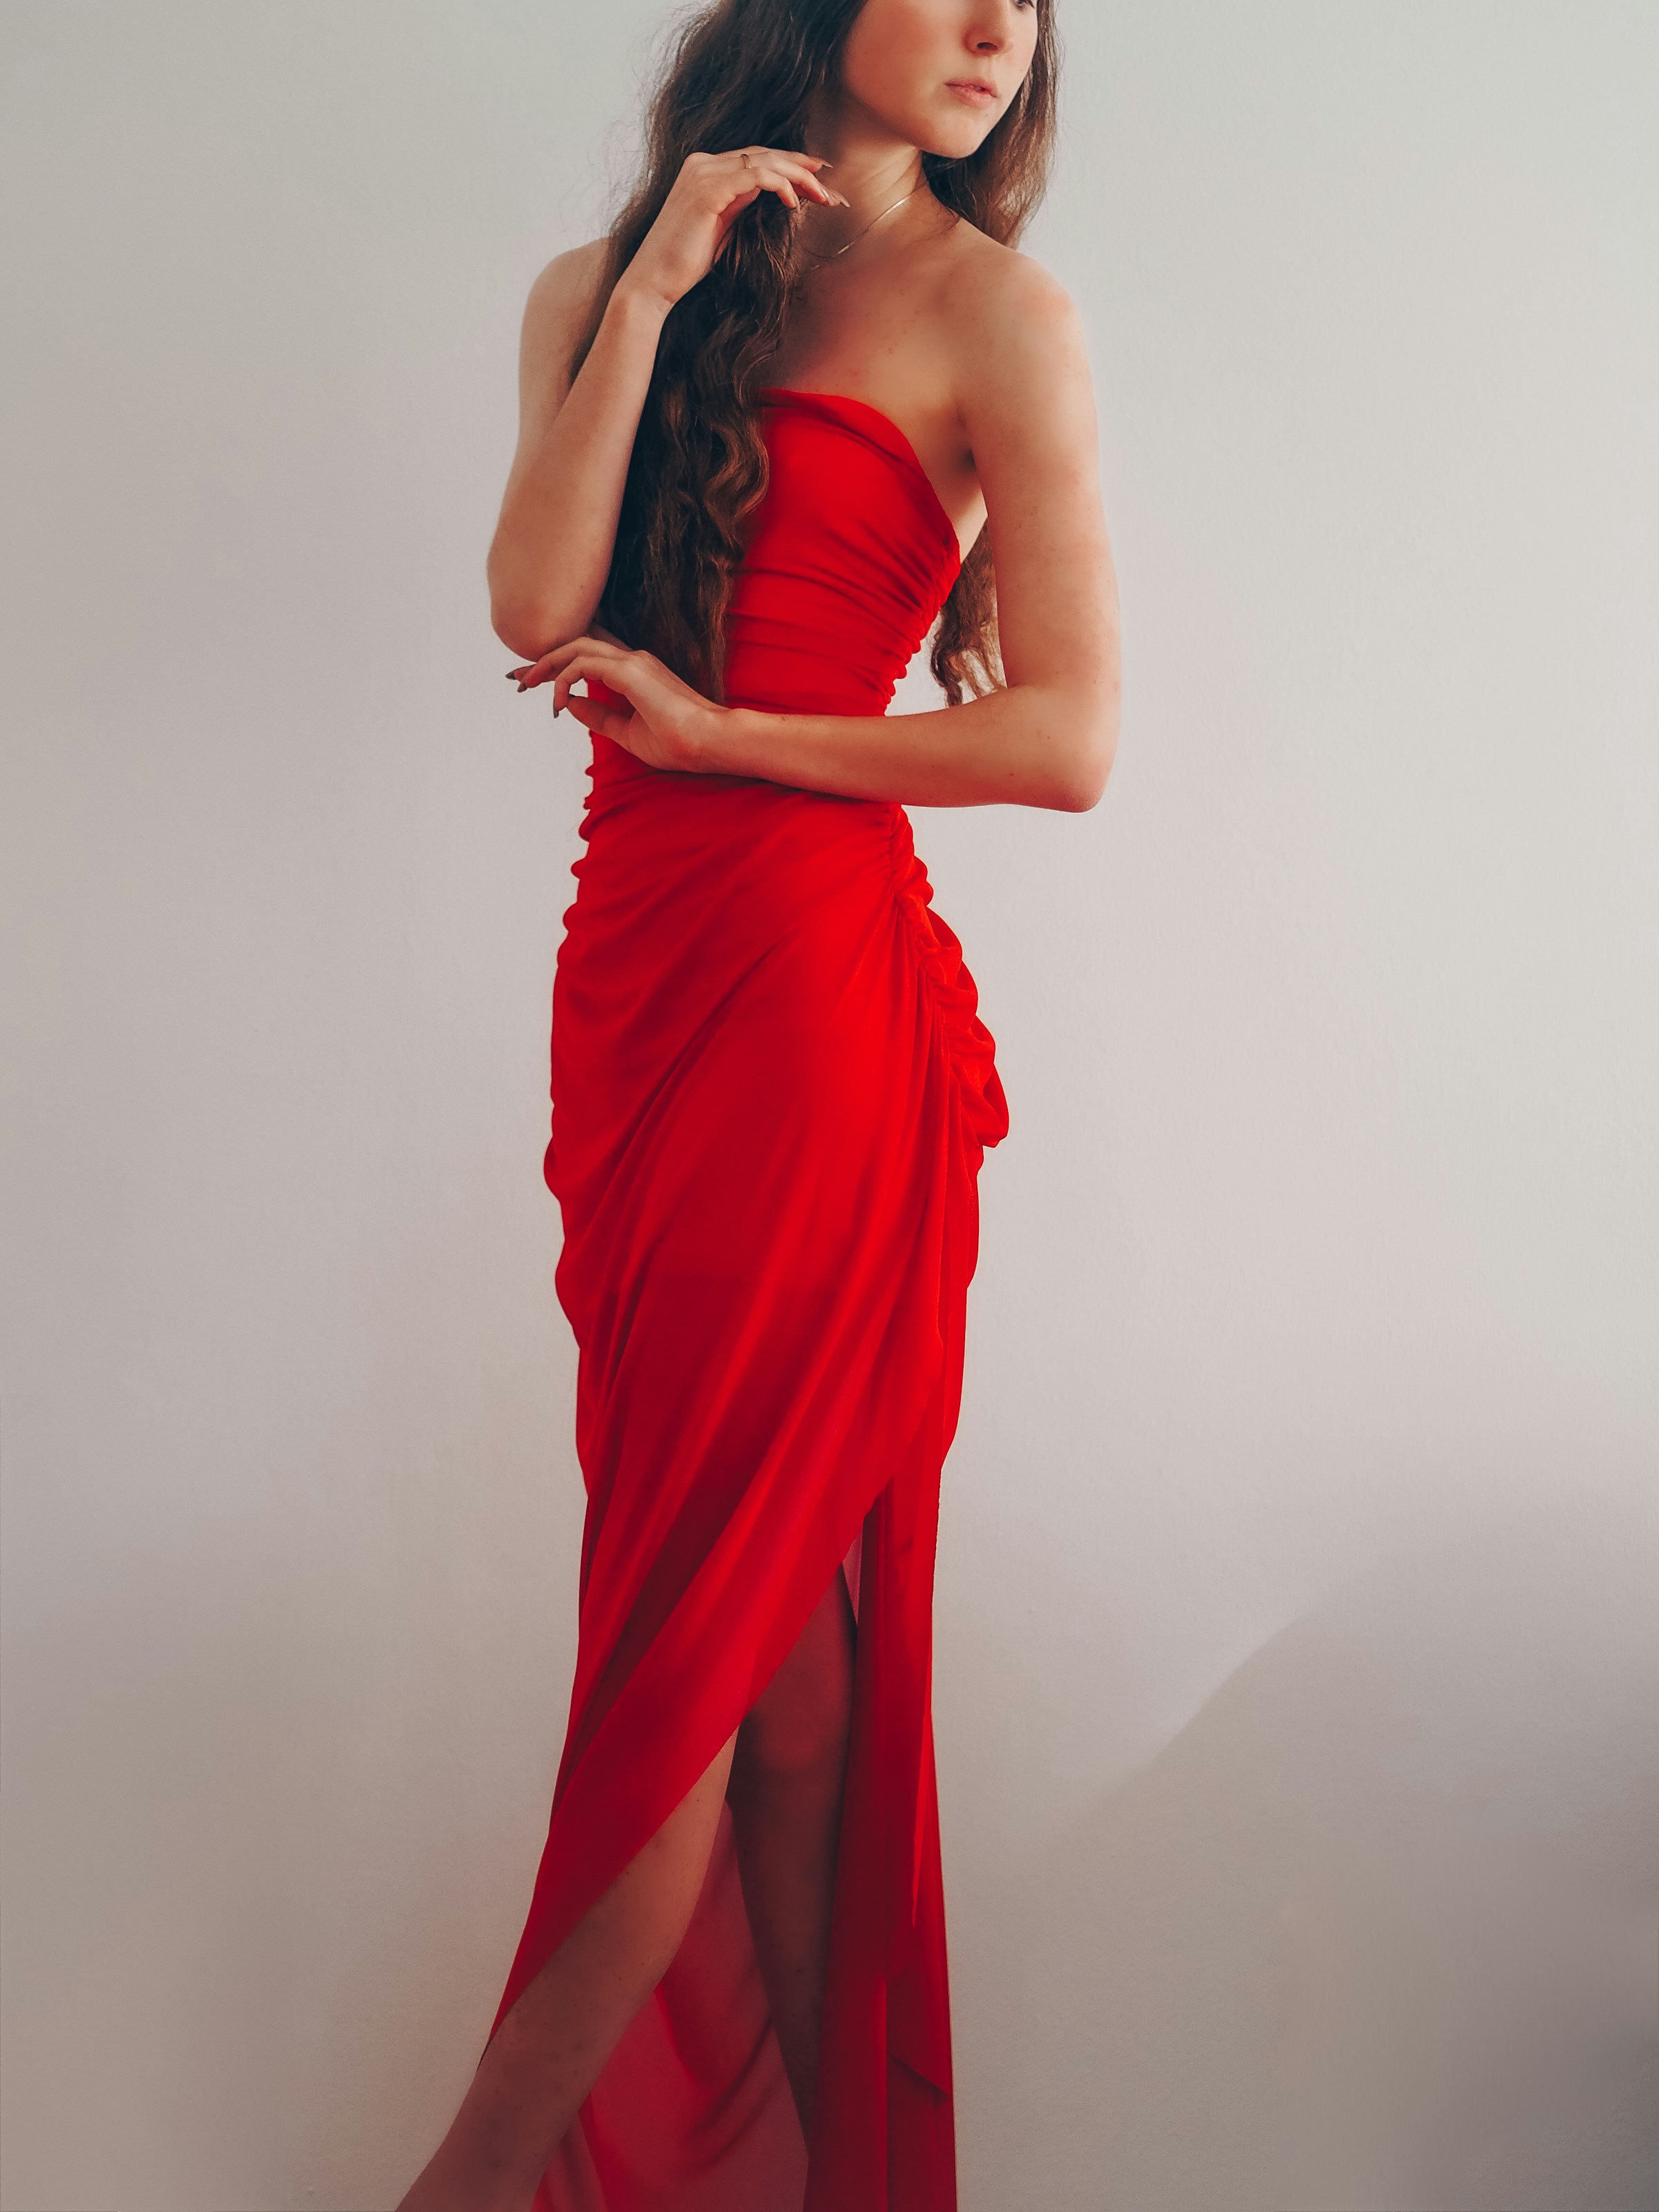 A girl in a red dress | Source: Unsplash